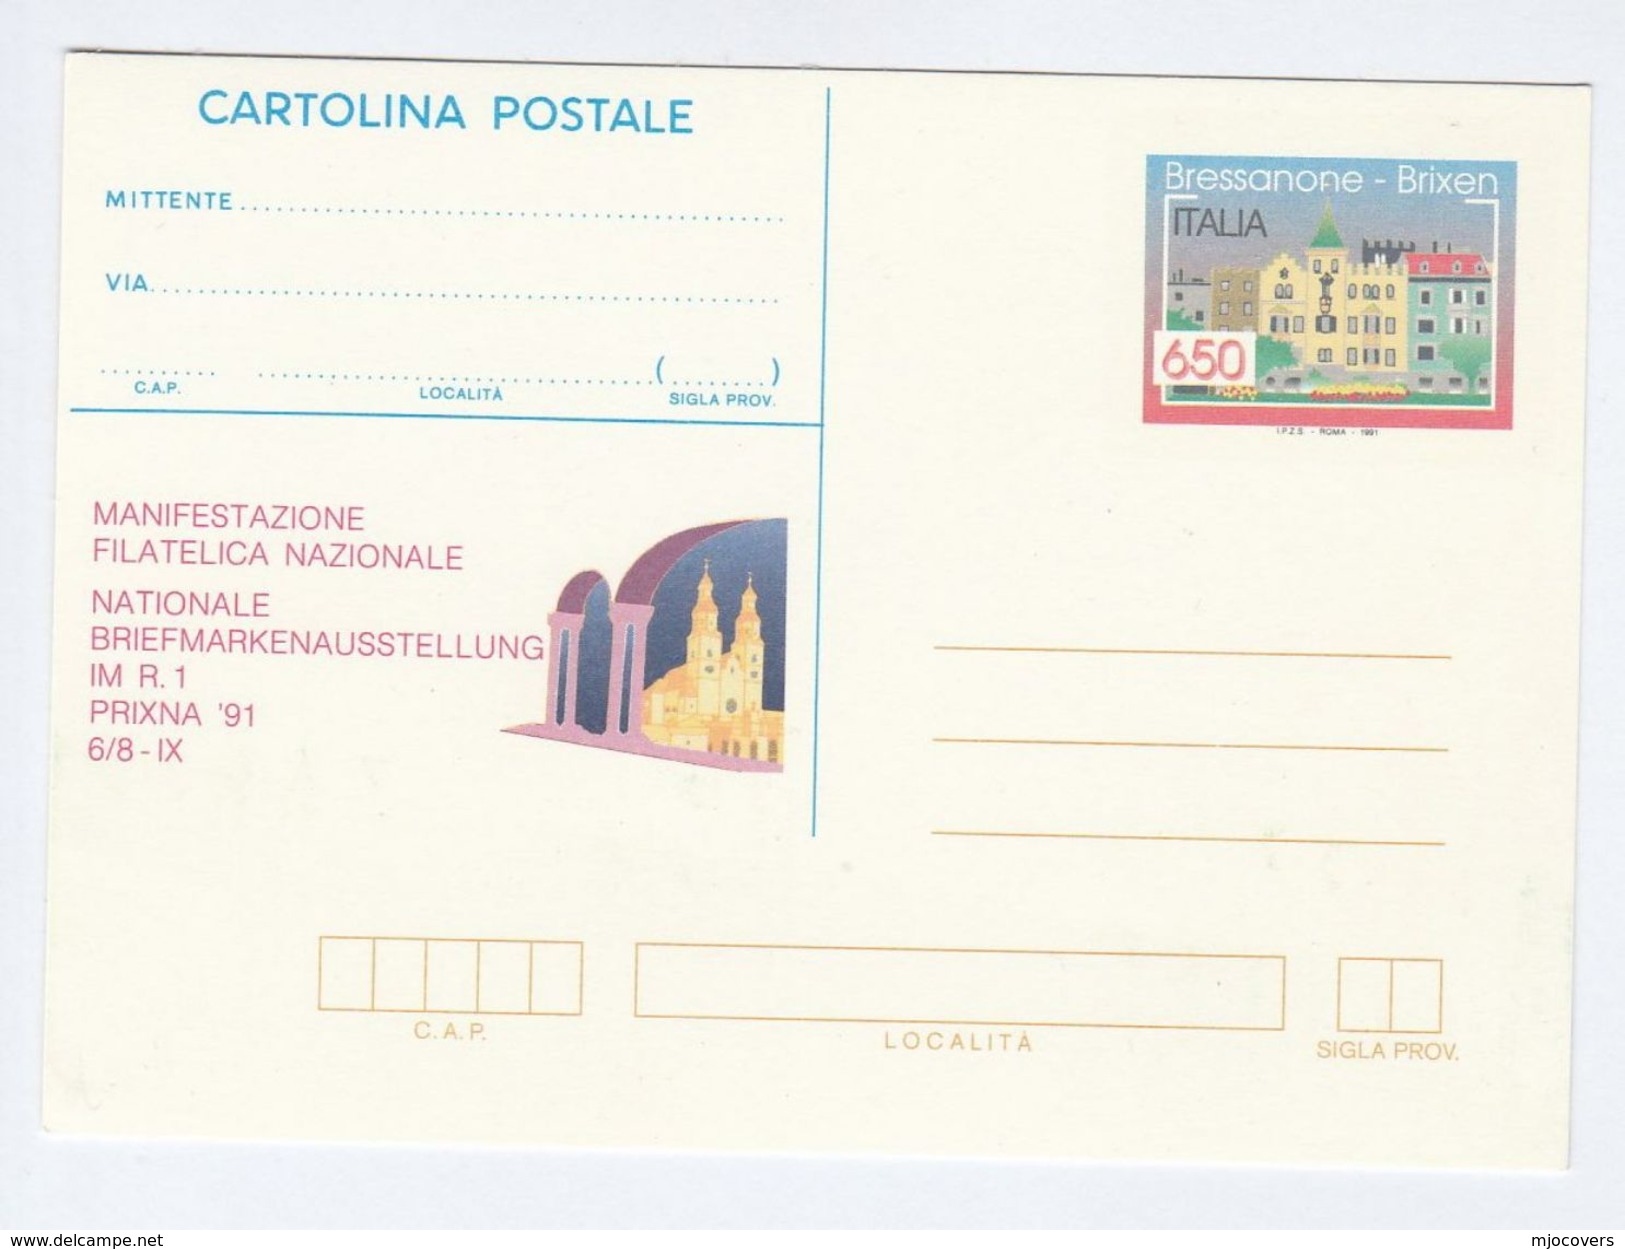 1991 Italy PRIXNA PHILATELIC EXHIBITION Illus POSTAL  STATIONERY CARD Stamps Cover - Philatelic Exhibitions